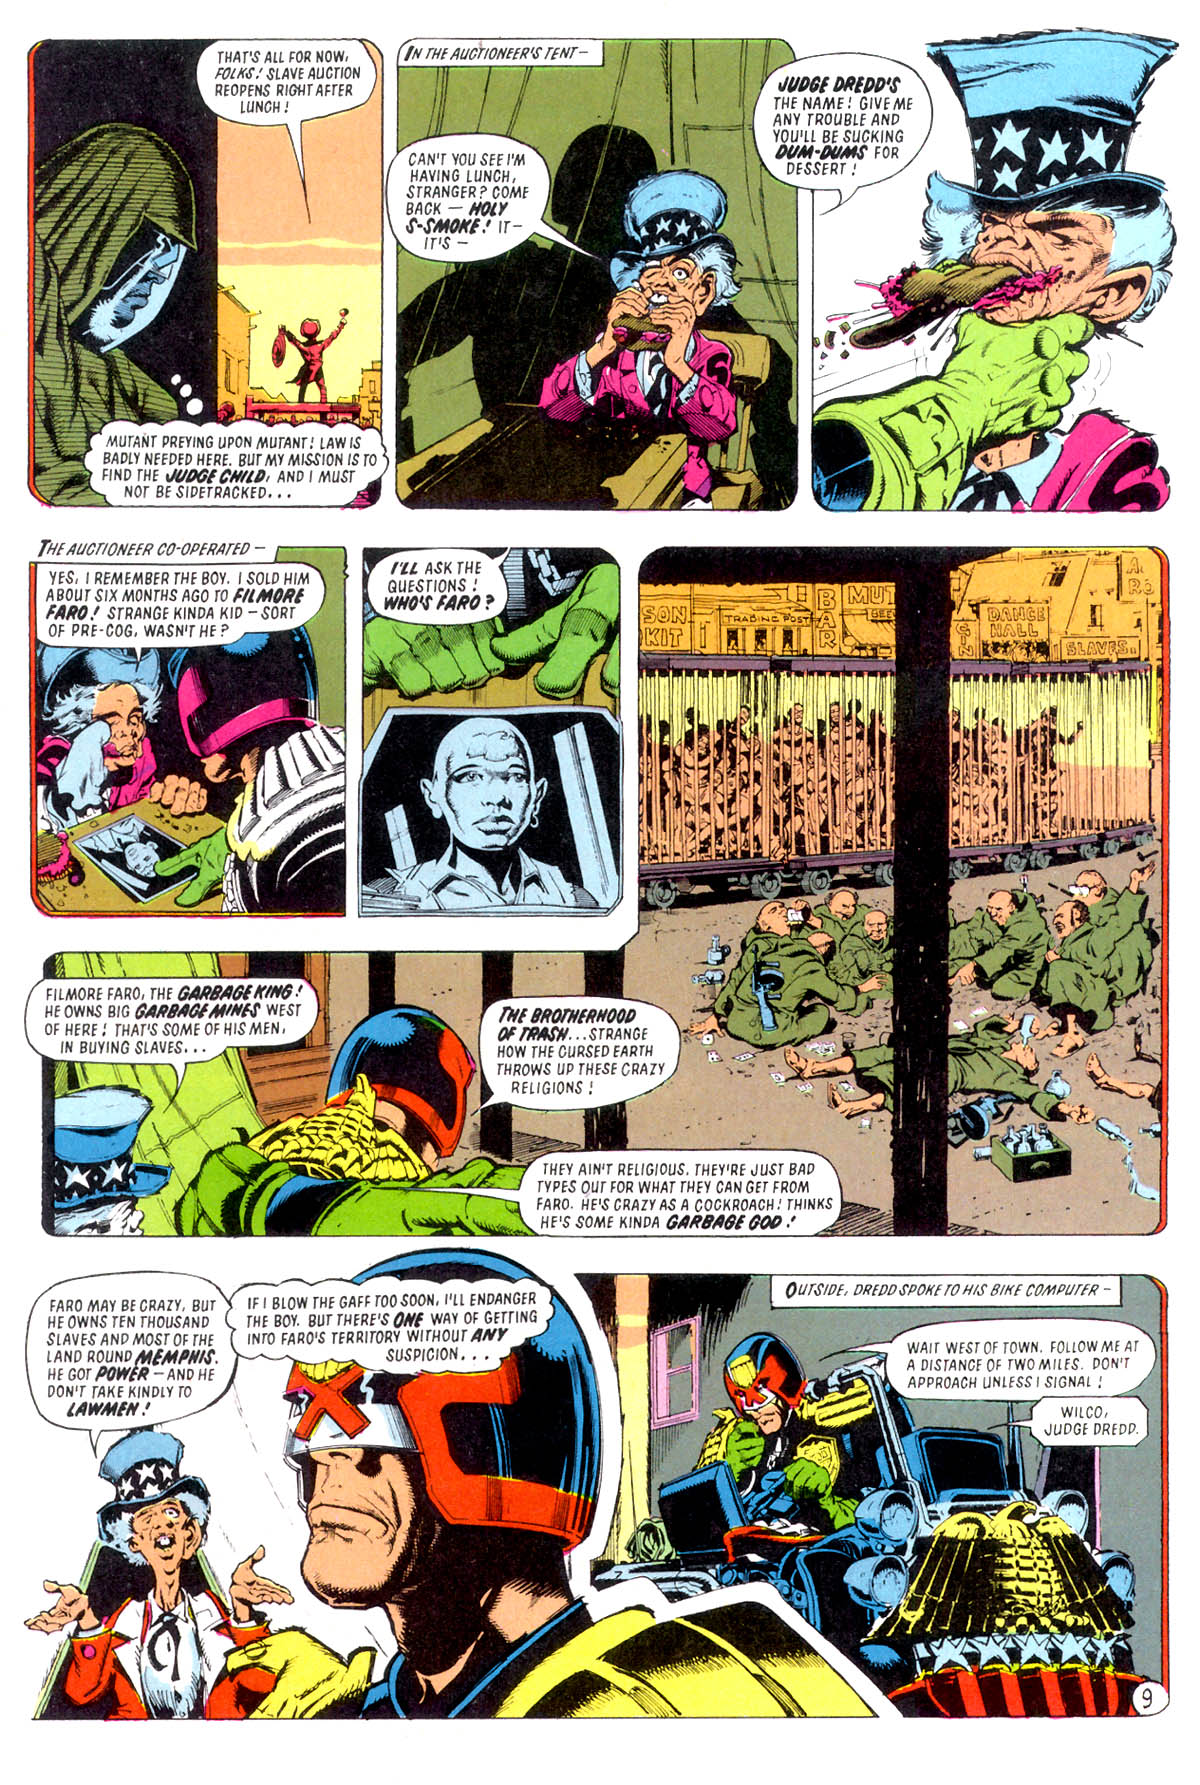 Read online Judge Dredd: The Complete Case Files comic -  Issue # TPB 4 - 10